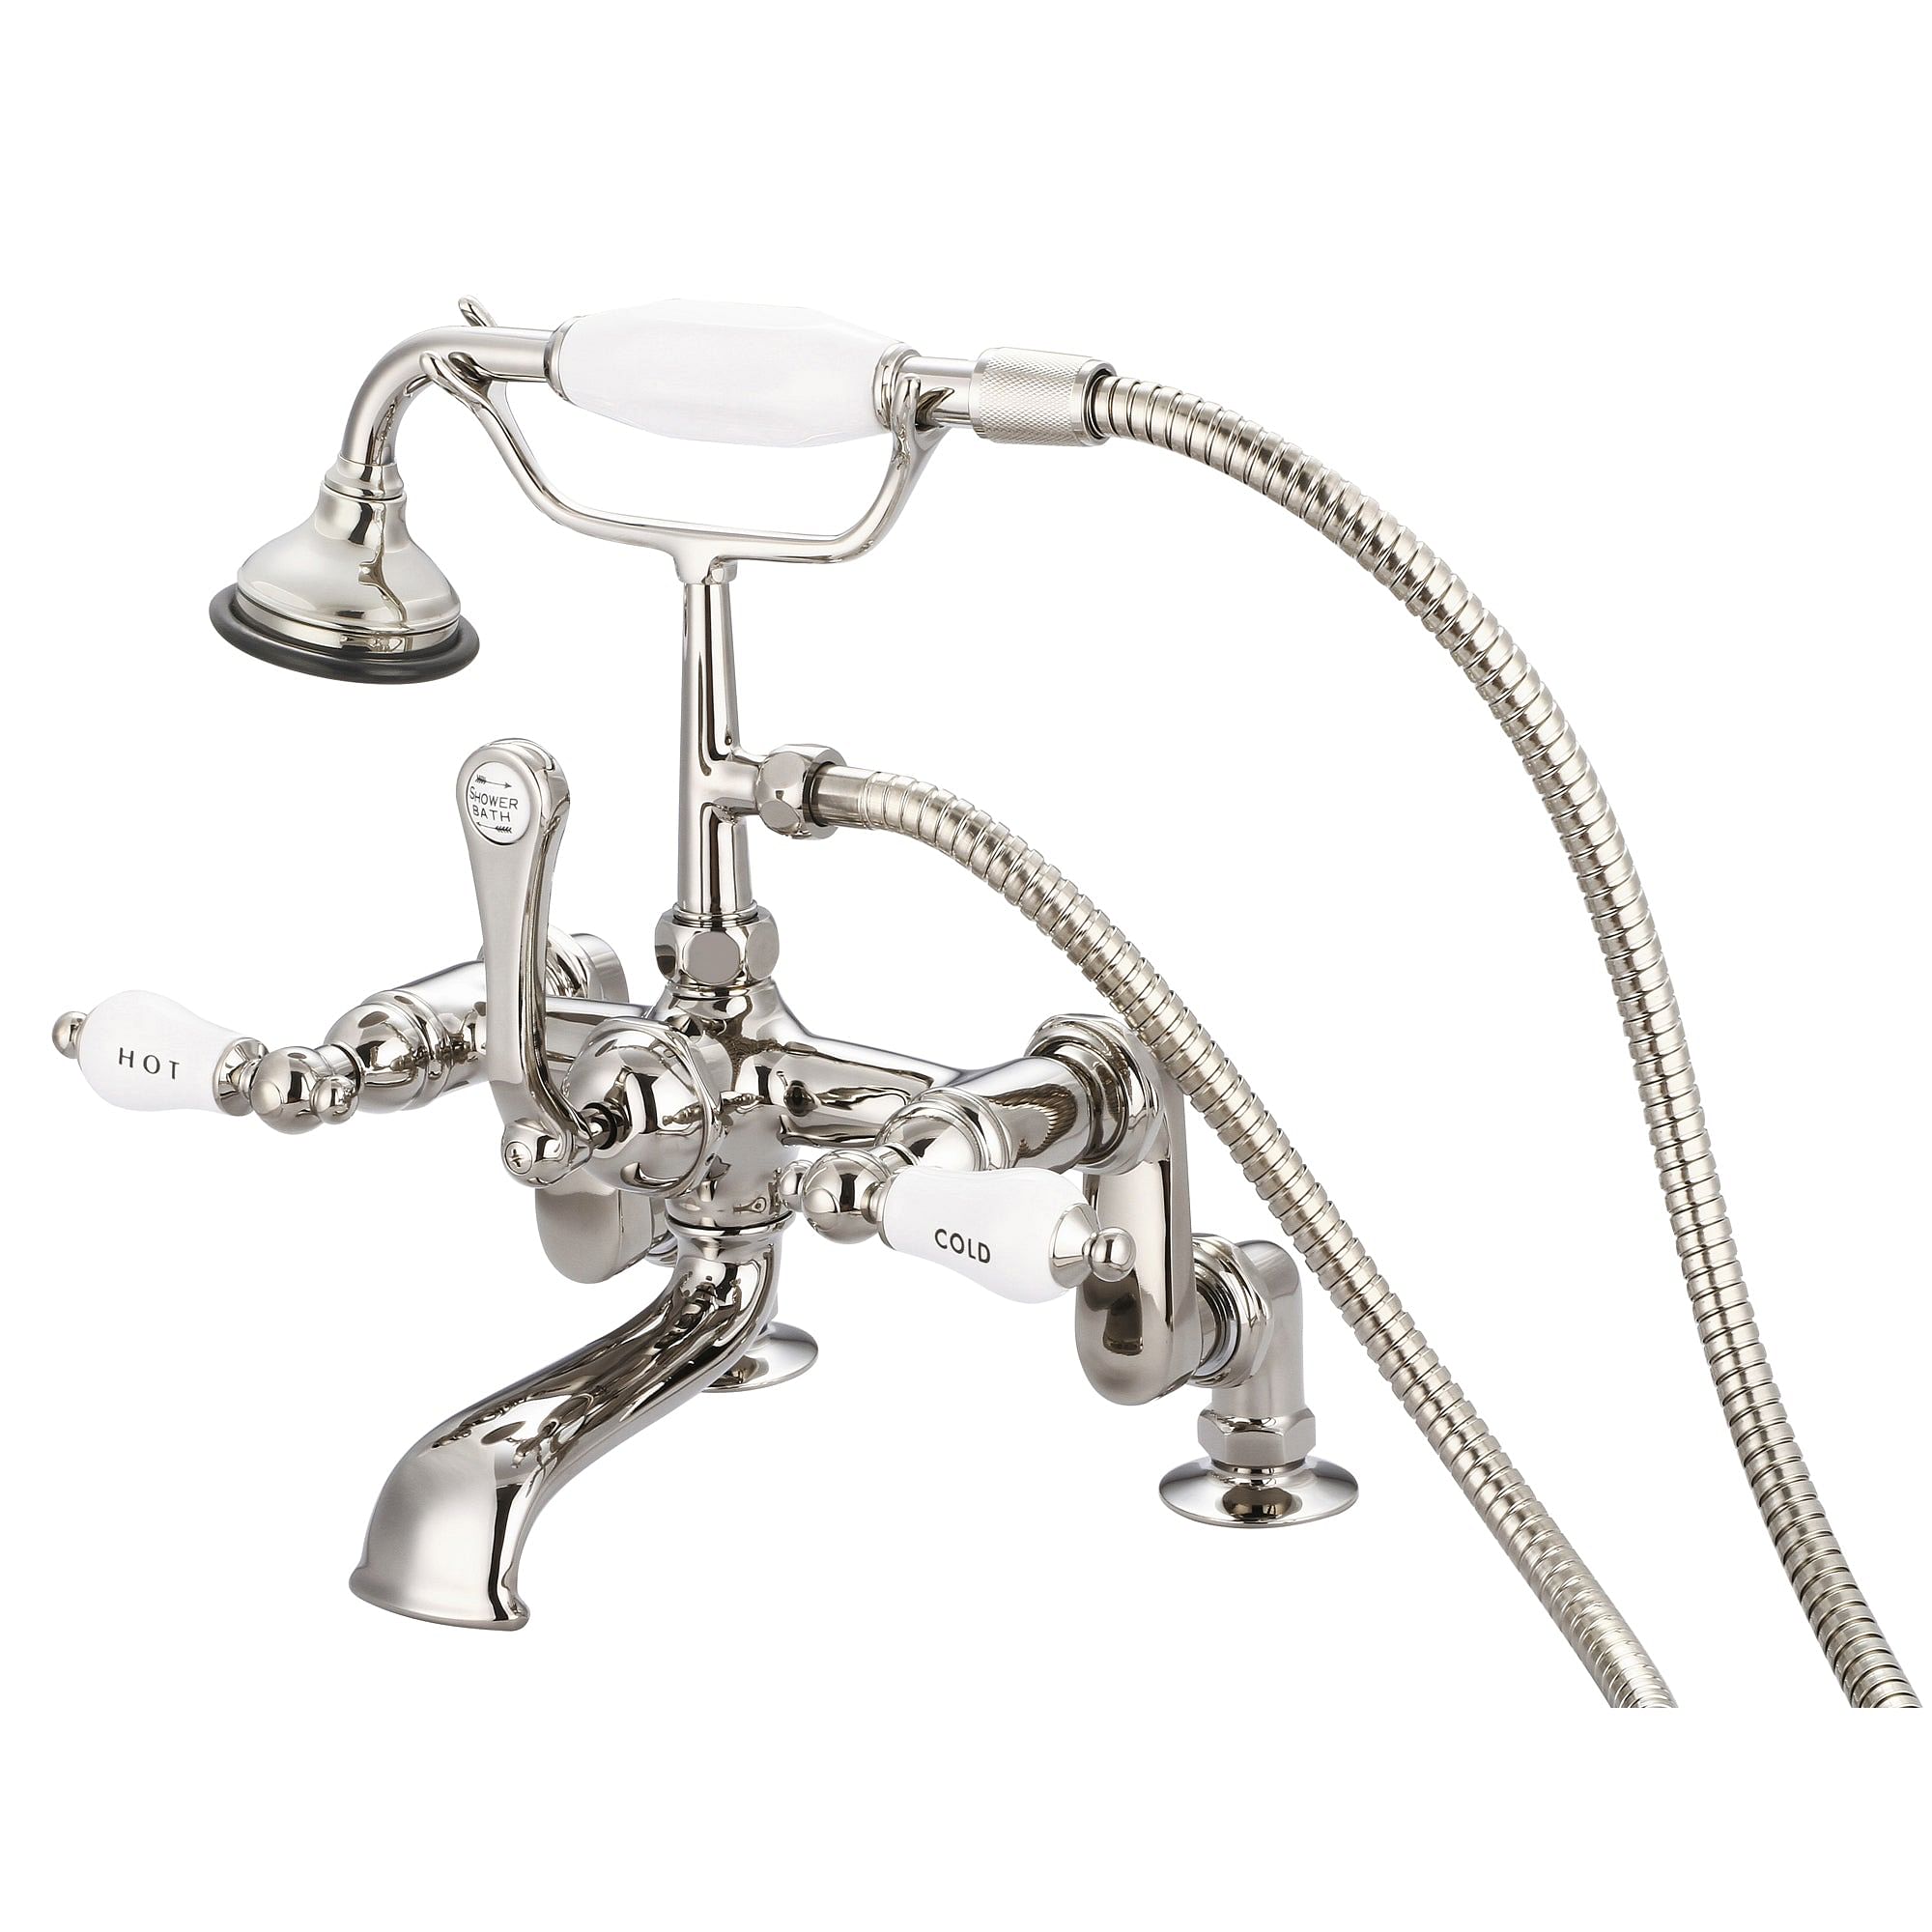 Vintage Classic Adjustable Center Deck Mount Tub Faucet With Handheld Shower in Polished Nickel (PVD) Finish With Porcelain Lever Handles, Hot And Cold Labels Included